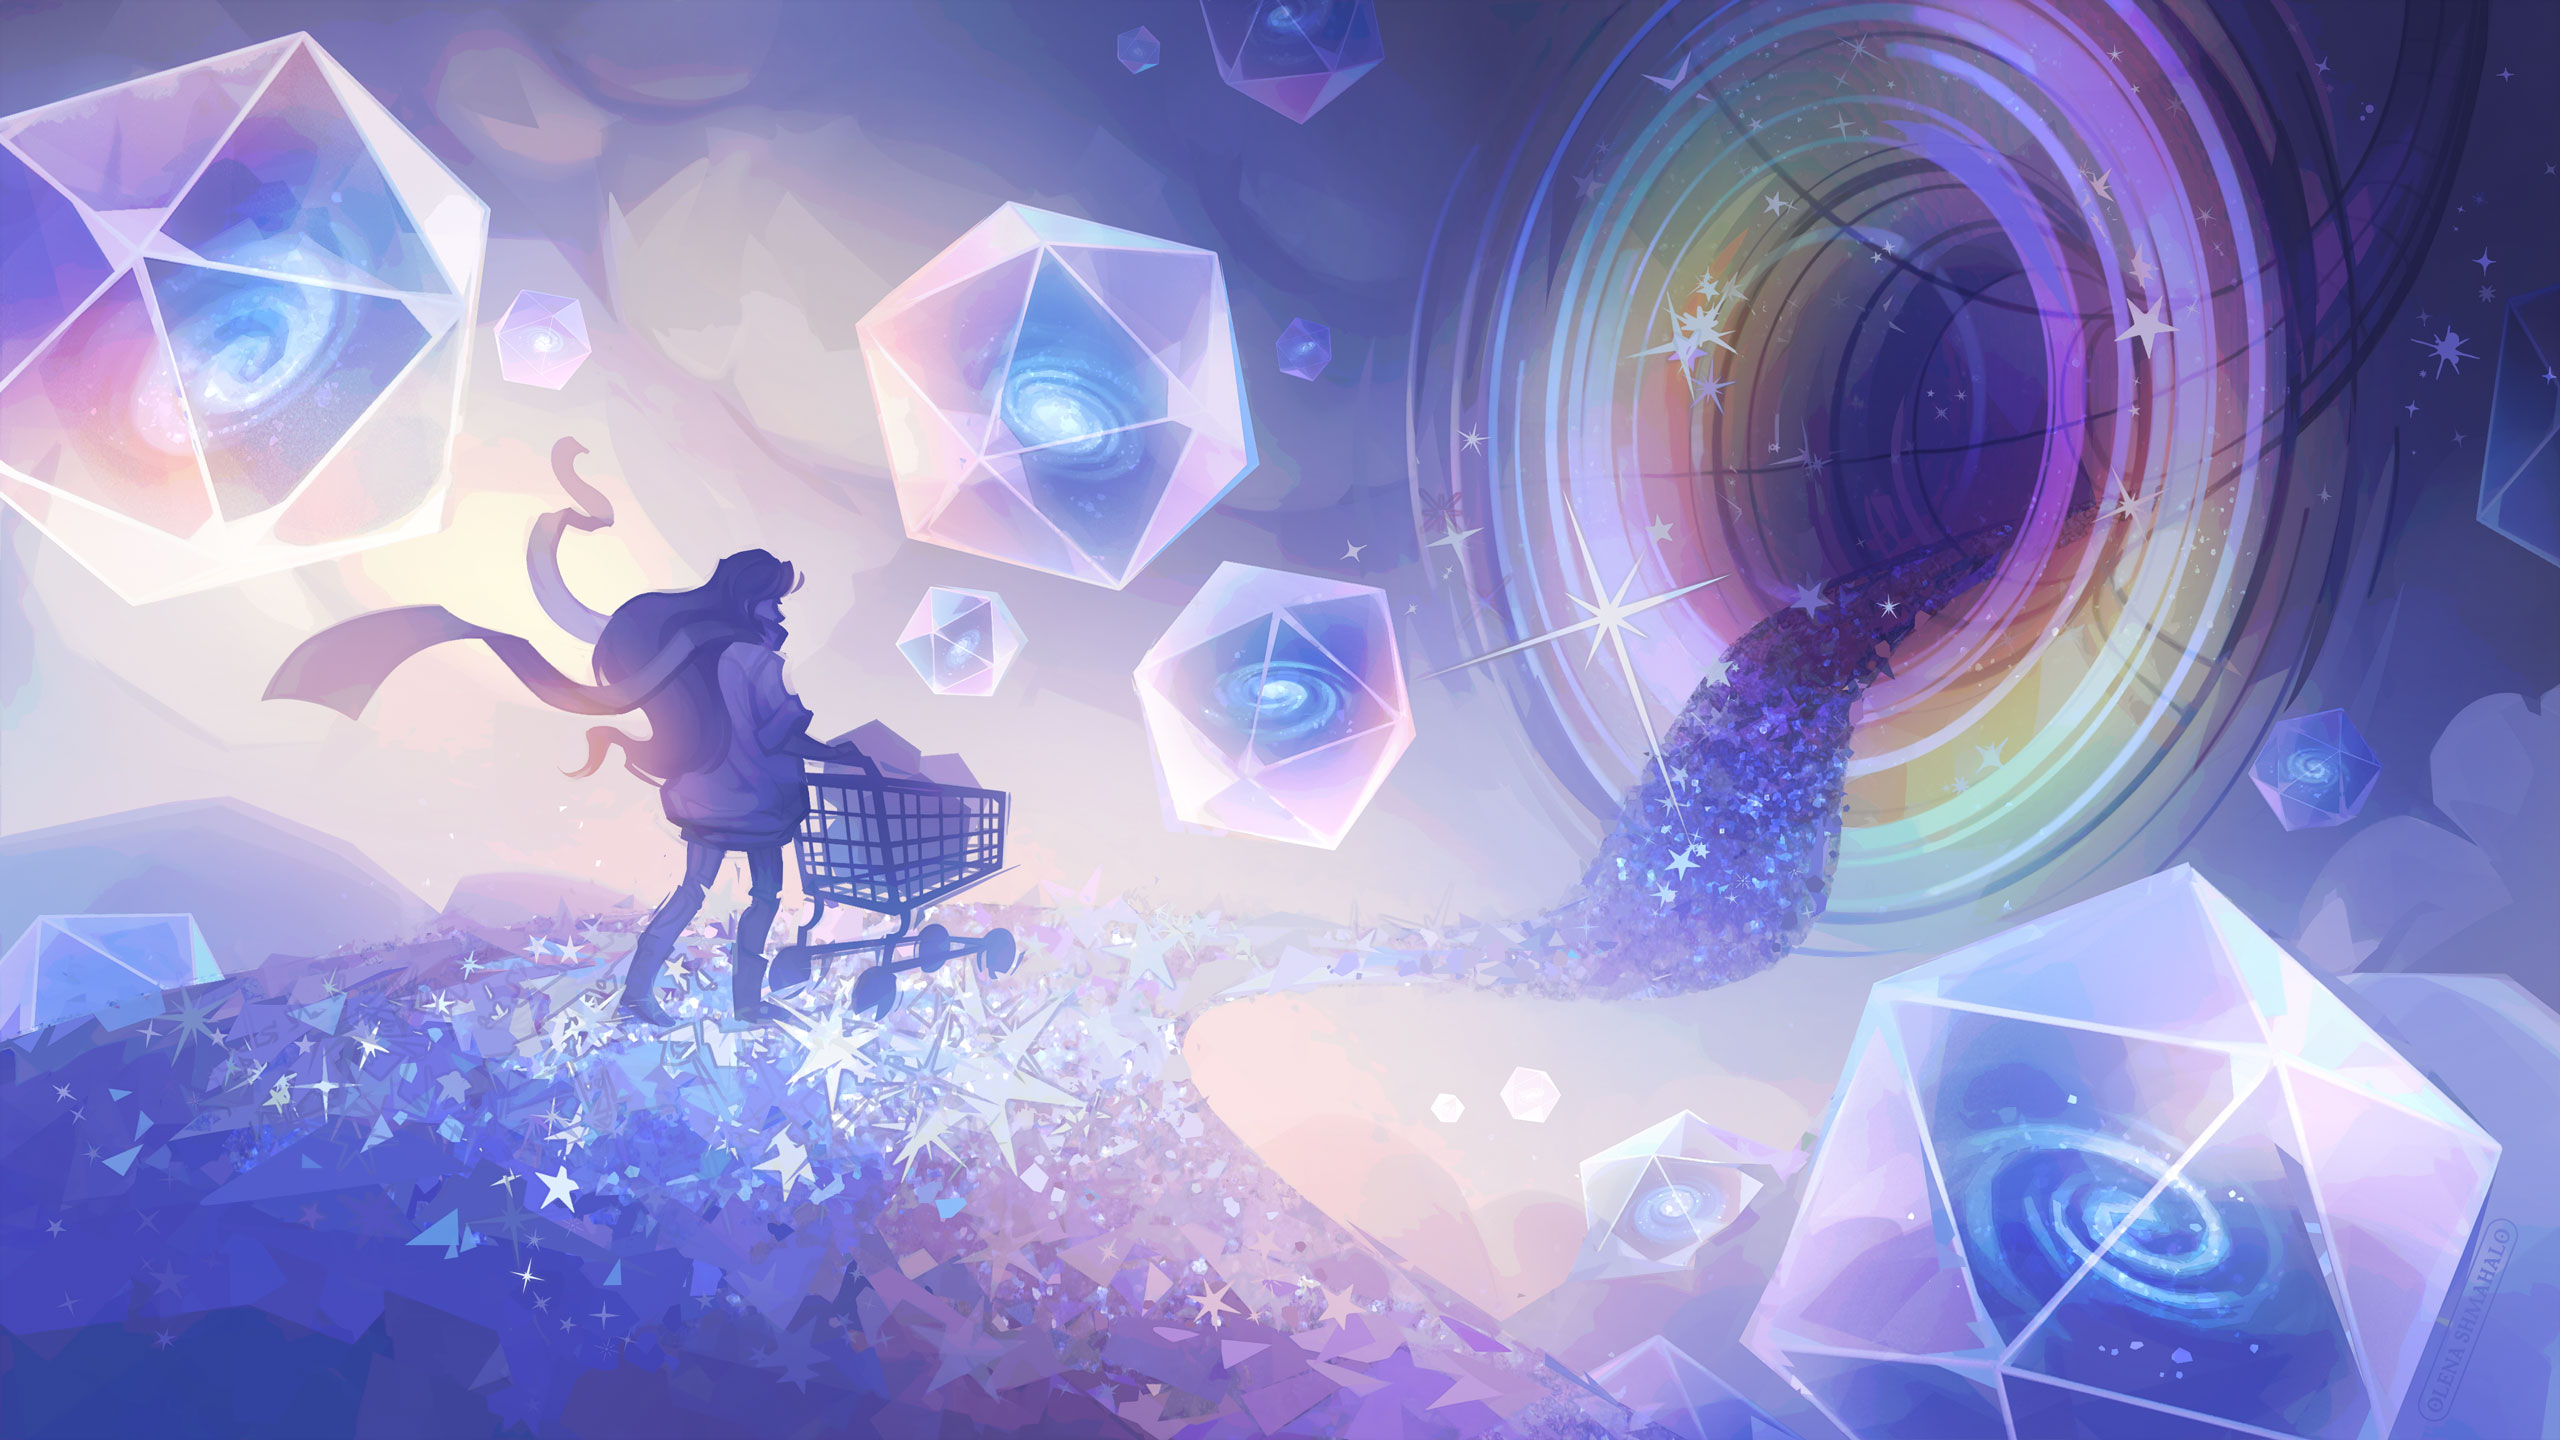 Stylized illustration in iridescent colors: a woman with a cart walking down a starry path toward a funnel-shaped portal, surrounded by floating icosahedron bubbles containing galaxies.